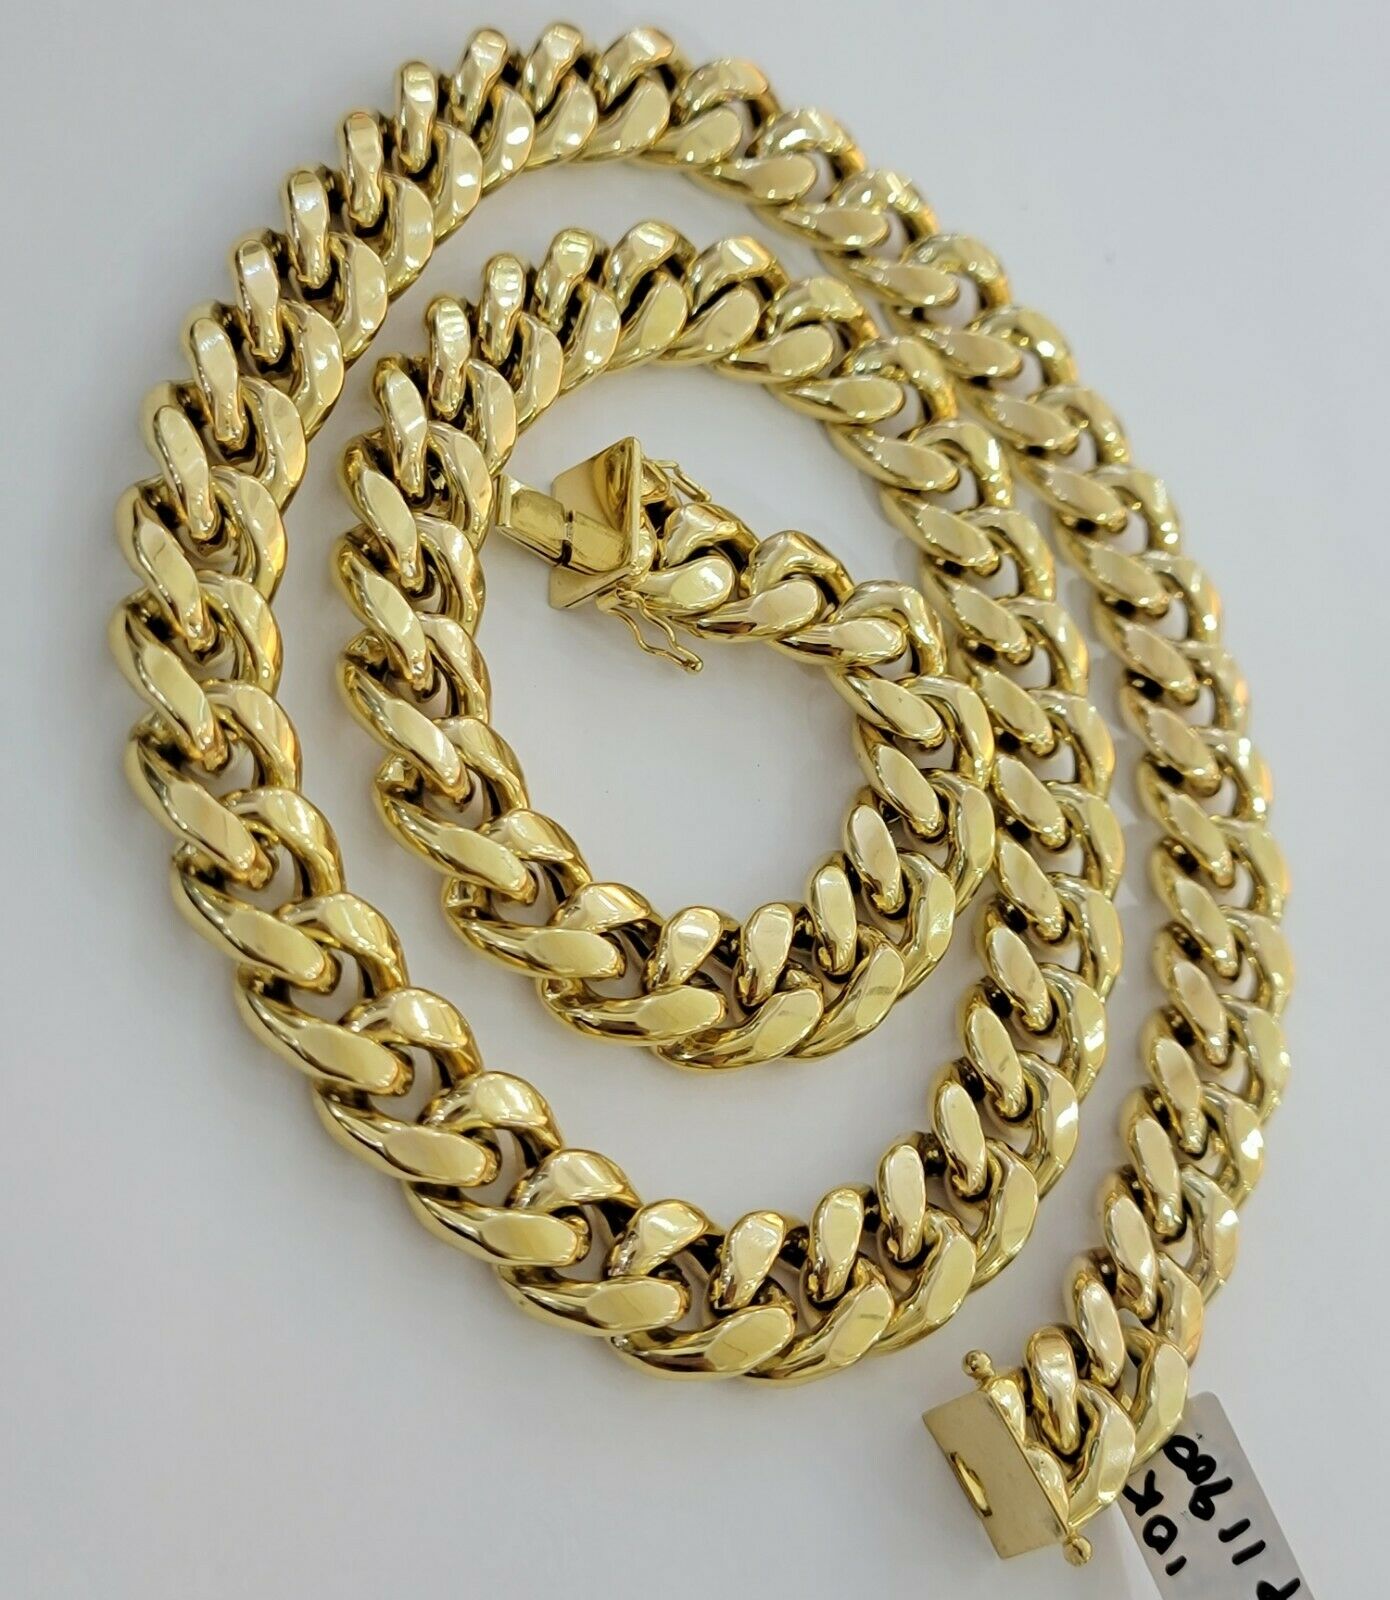 REAL 10k Gold Miami Cuban Chain 13mm Link Mens Necklace 24" 10kt Yellow, STRONG